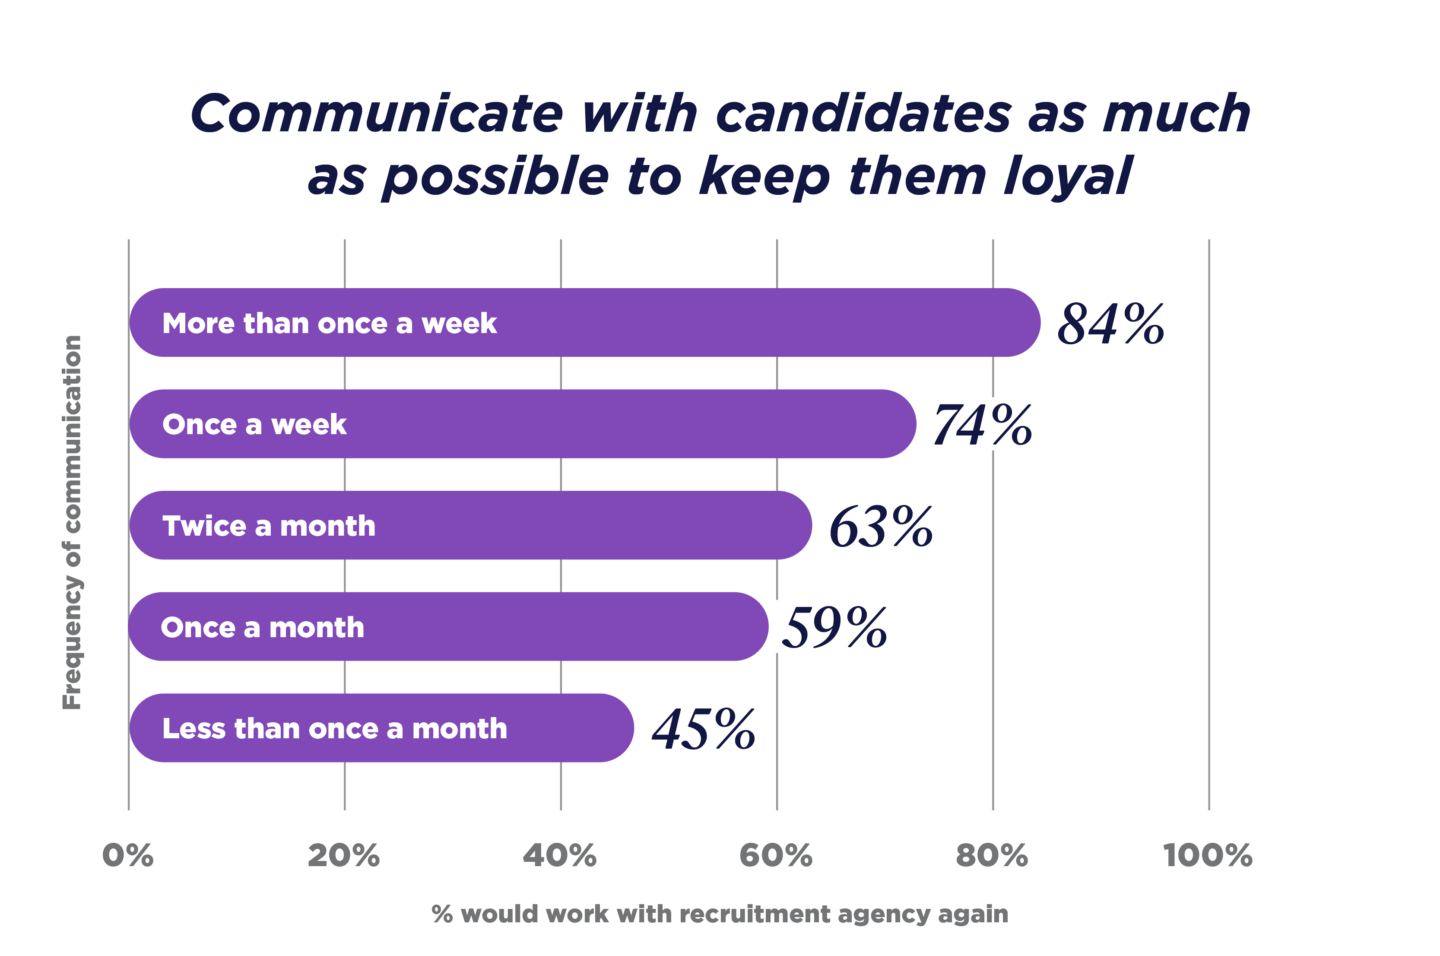 GRID_Talent Trends Report_2023_UKI Graphs_Communicate with candidates_V1